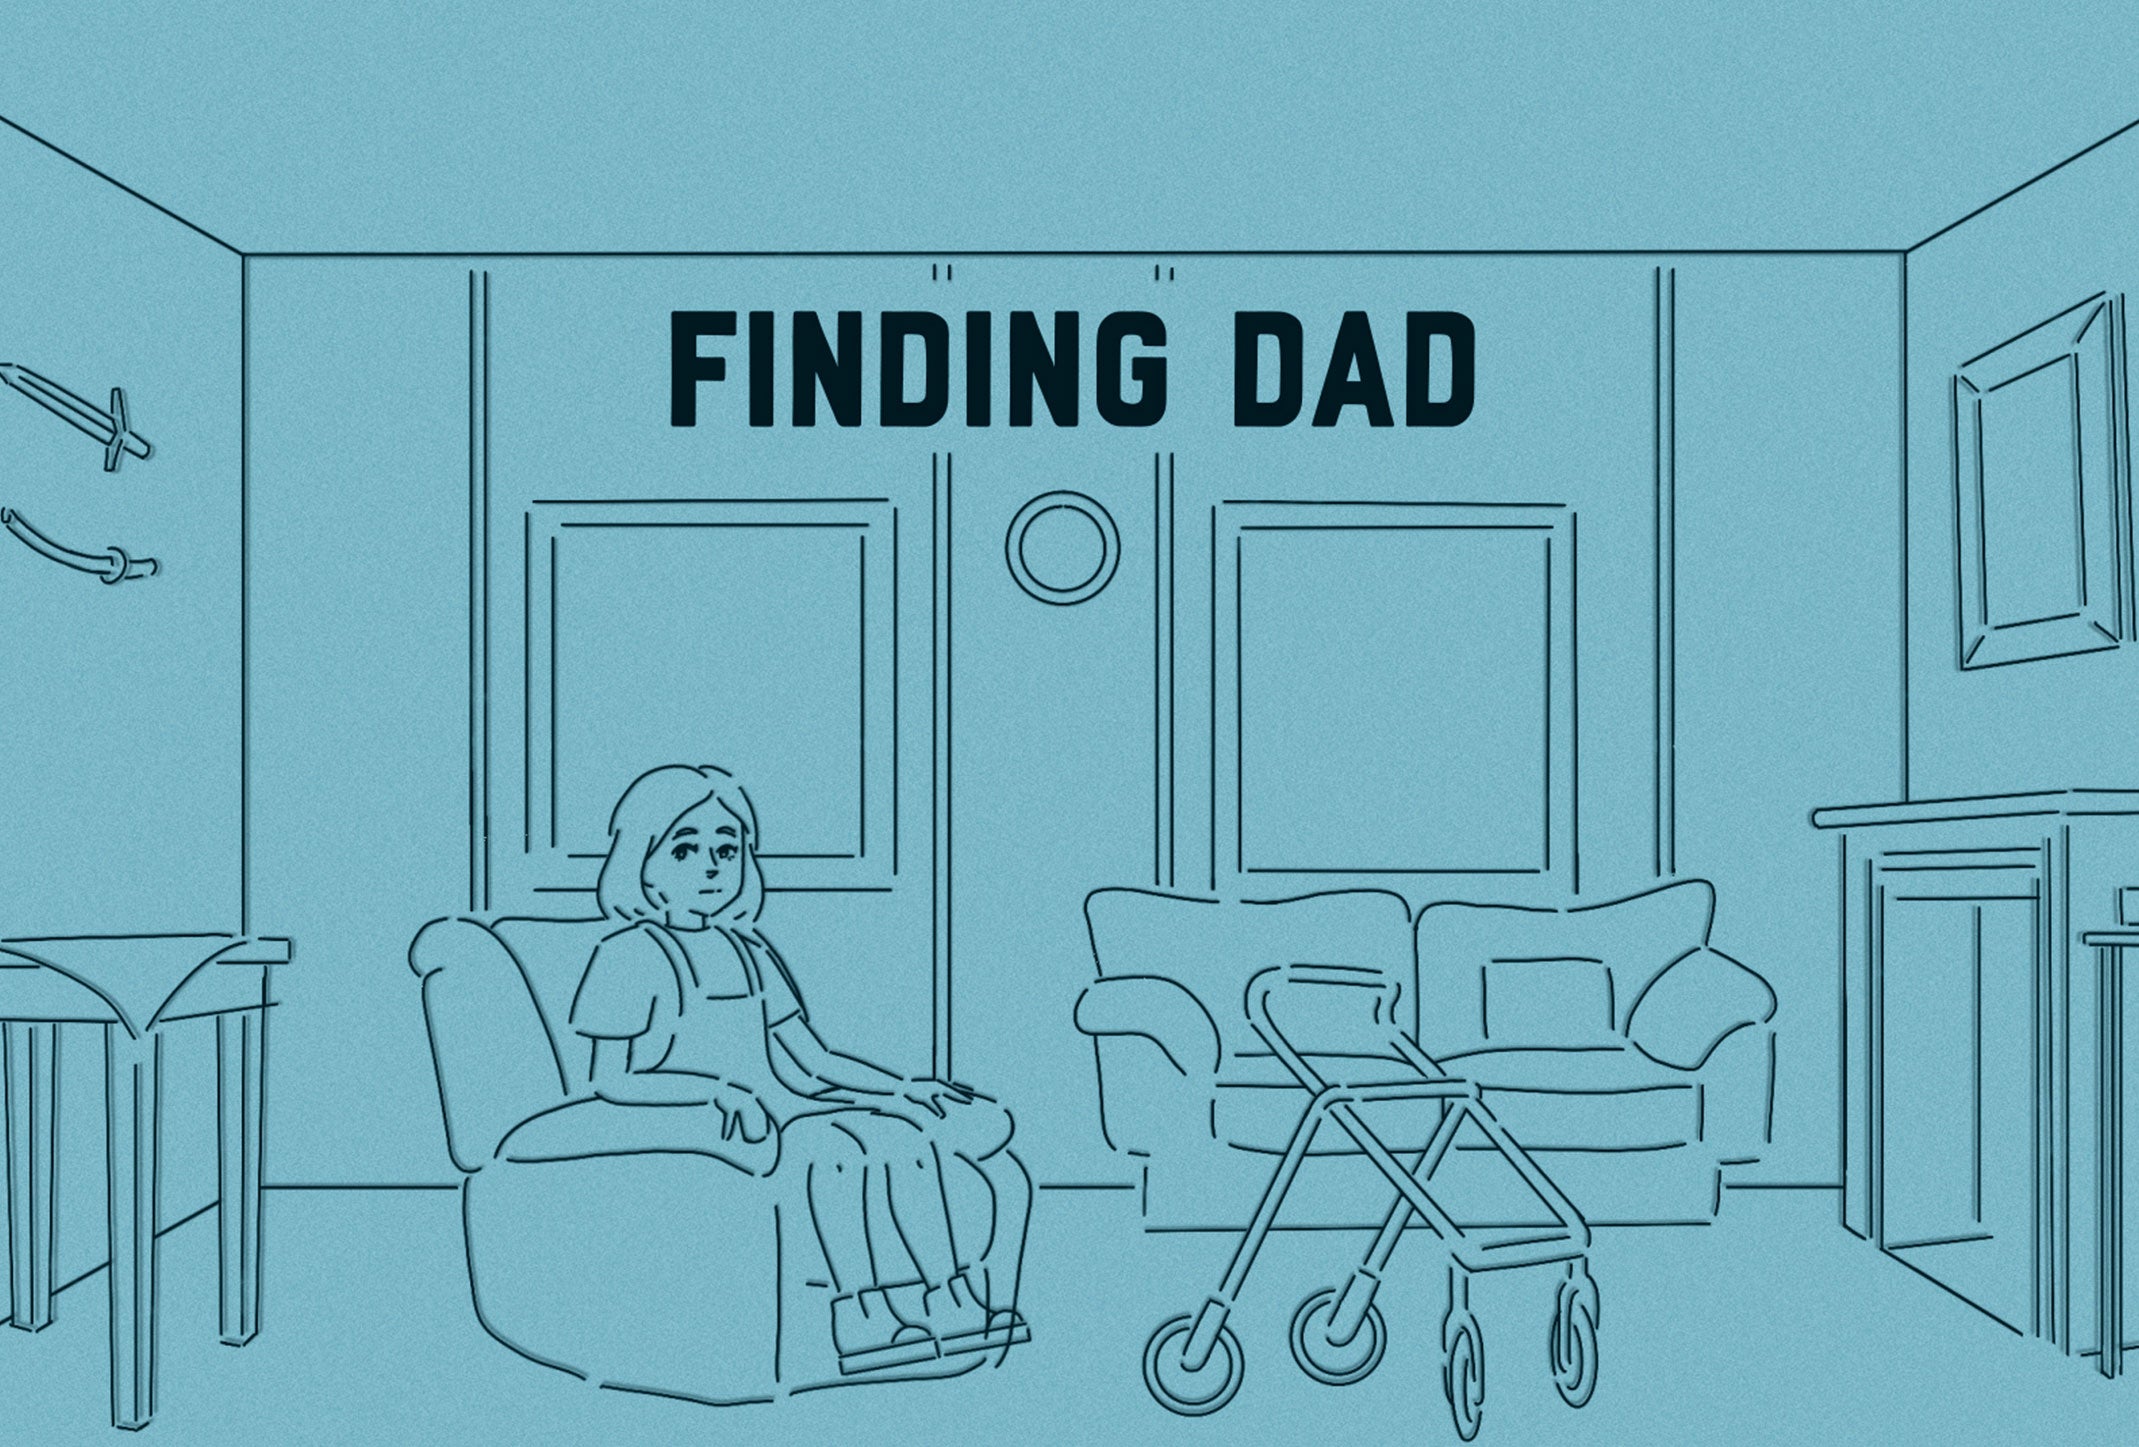 A 'finding dad' animation created by director Brit Phelan 